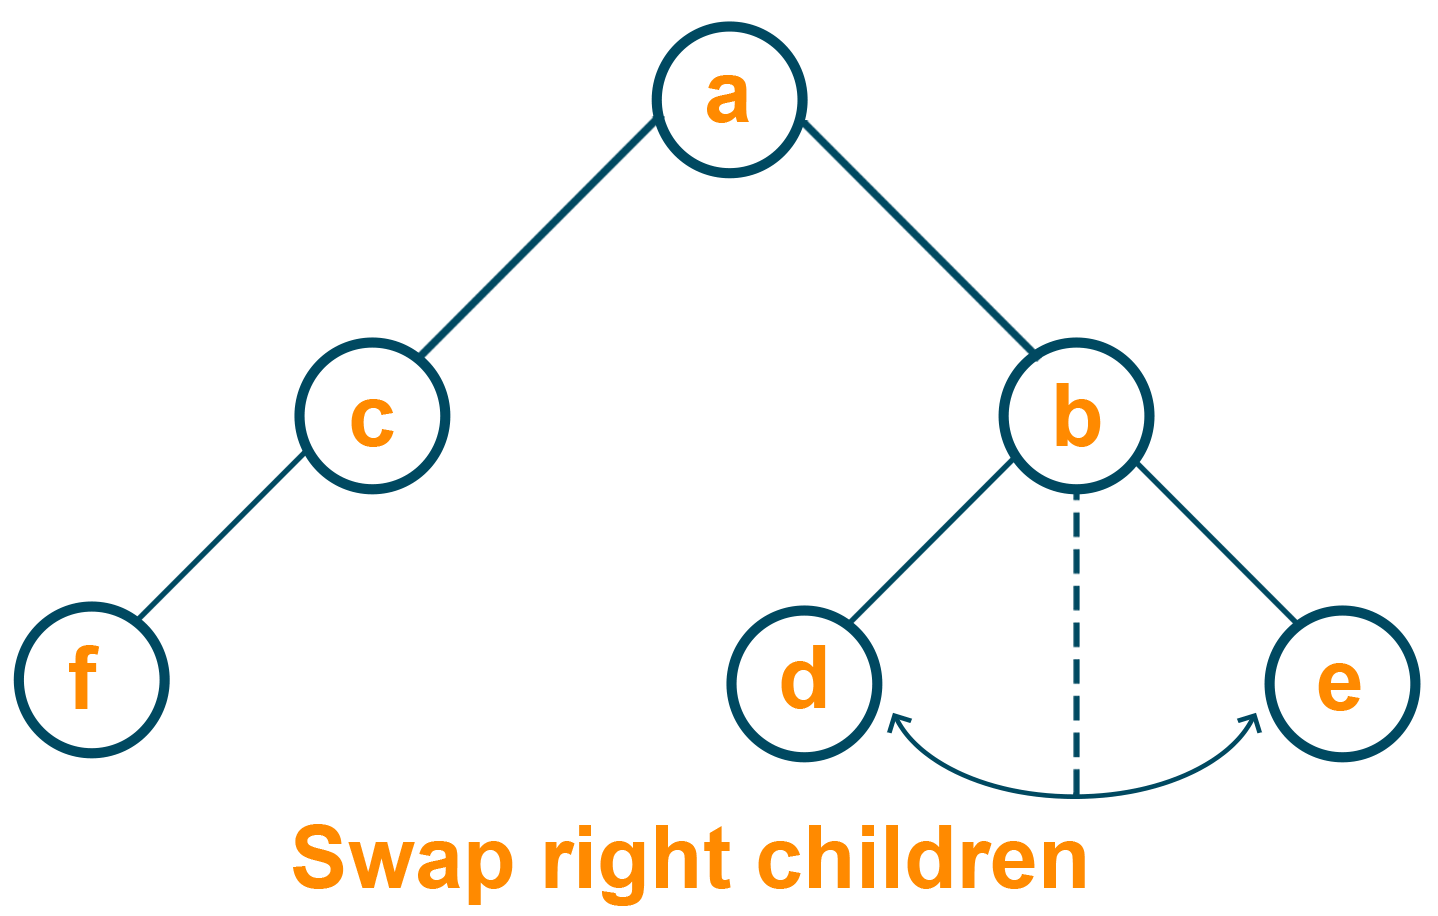 Swapping the children of right subtree